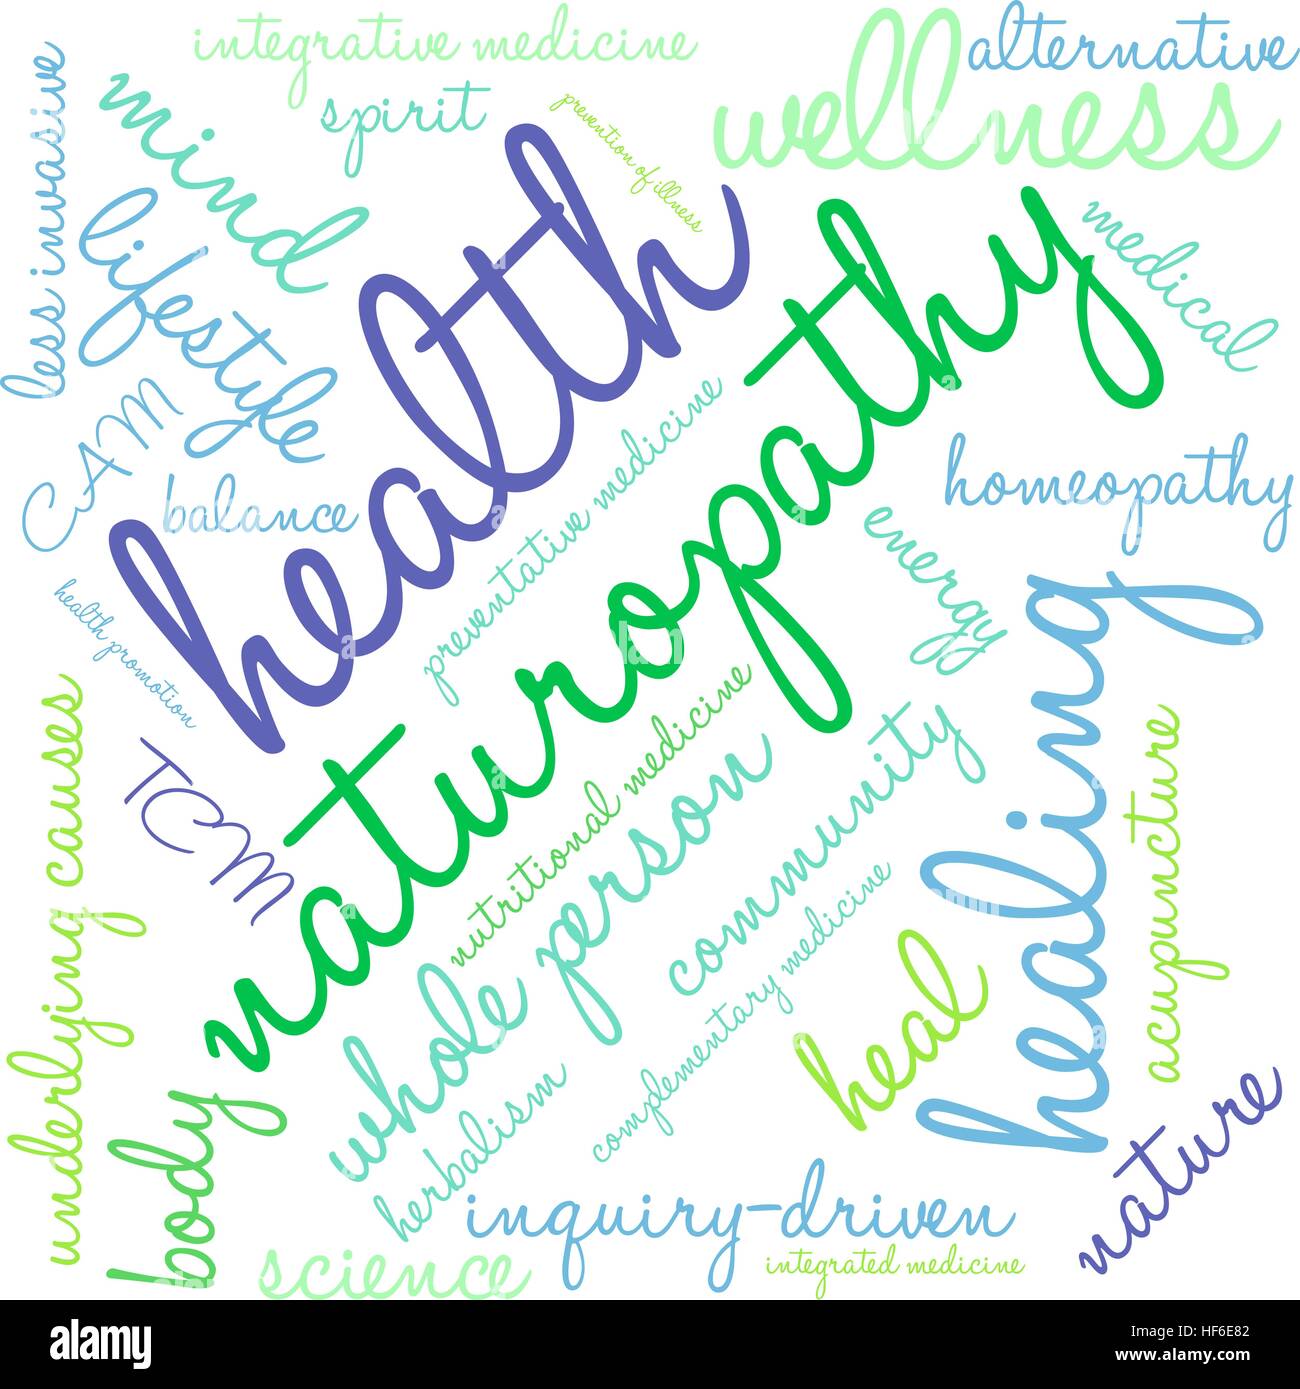 Naturopathy word cloud on a white background. Stock Vector